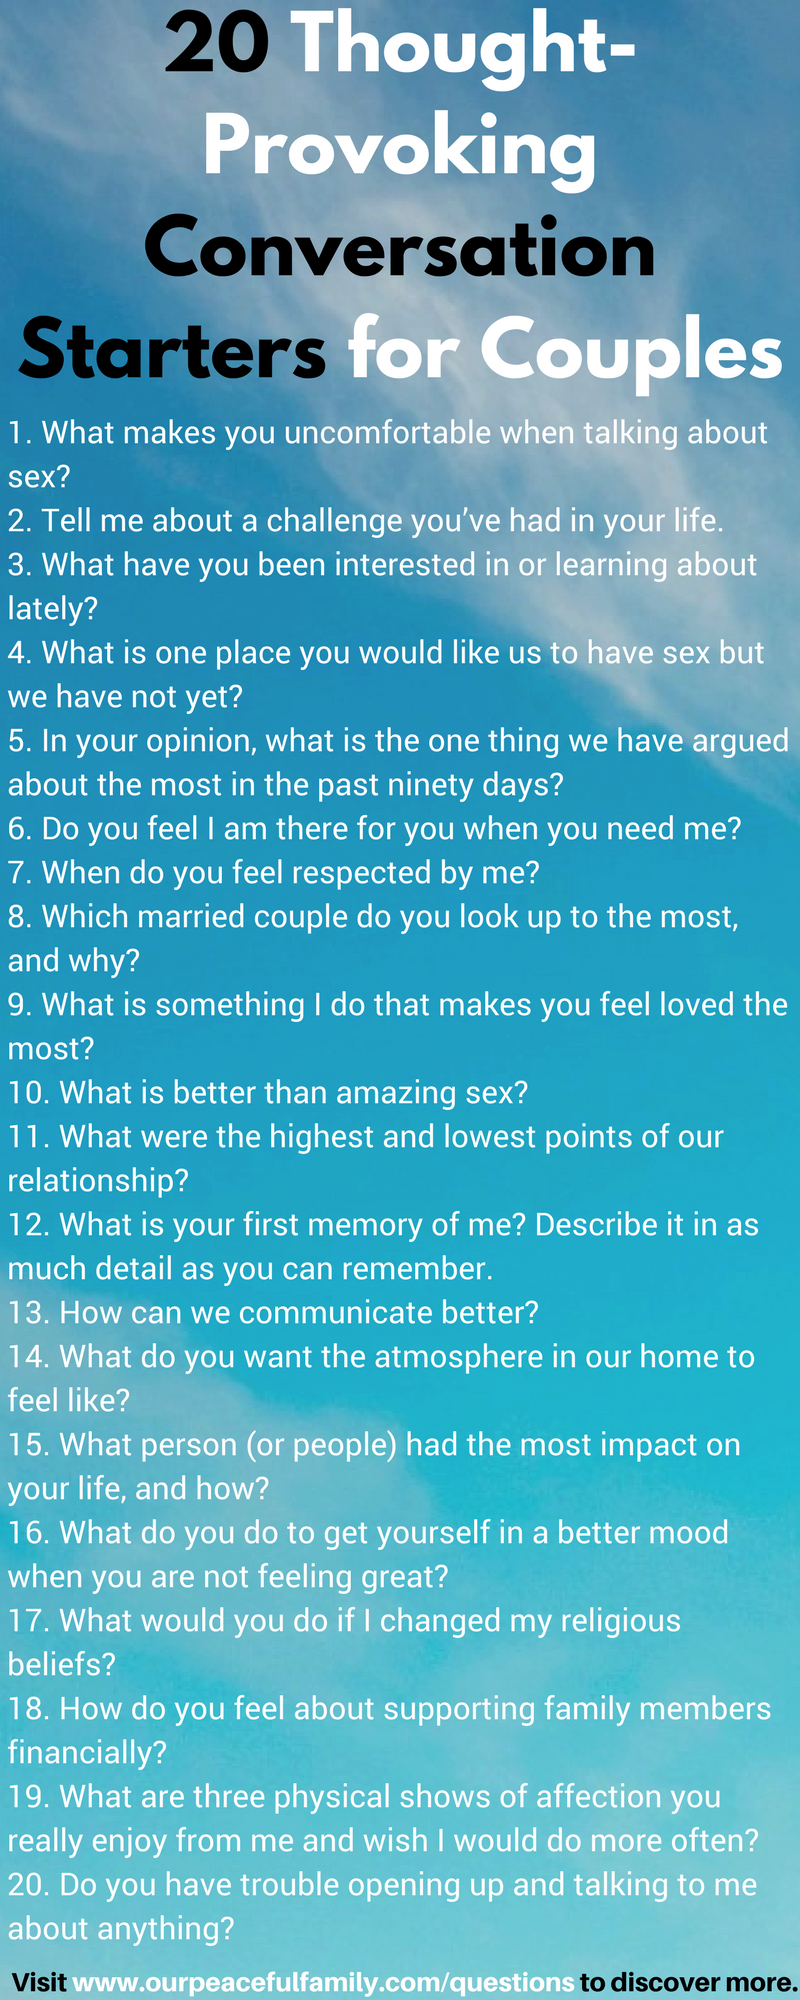 Questions For Couples: 69 Thought-Provoking Conversation Starters - Free Printable Compatibility Test For Couples